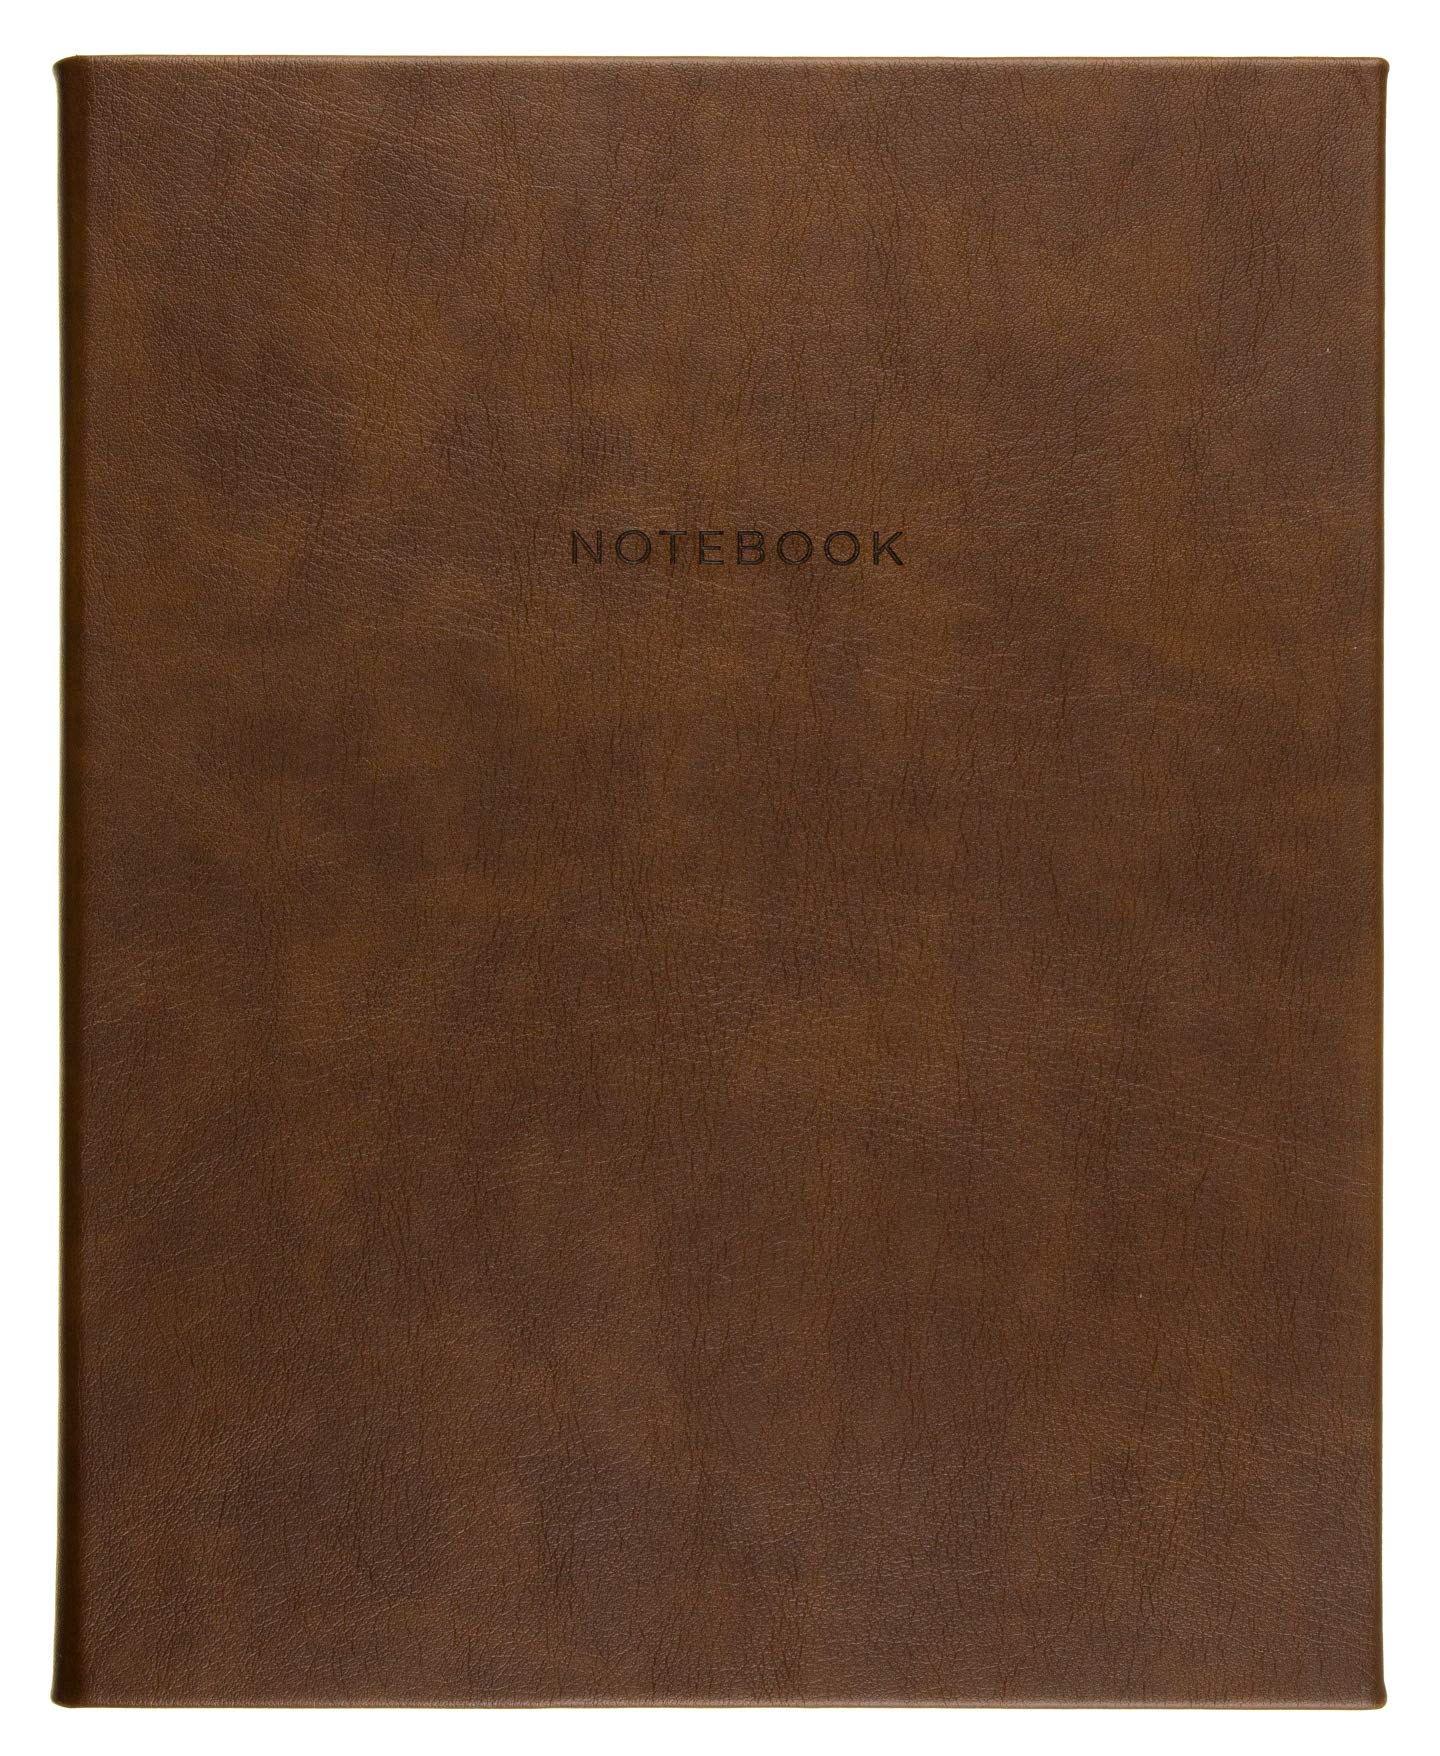 Eccolo Large Lined Journal Notebook